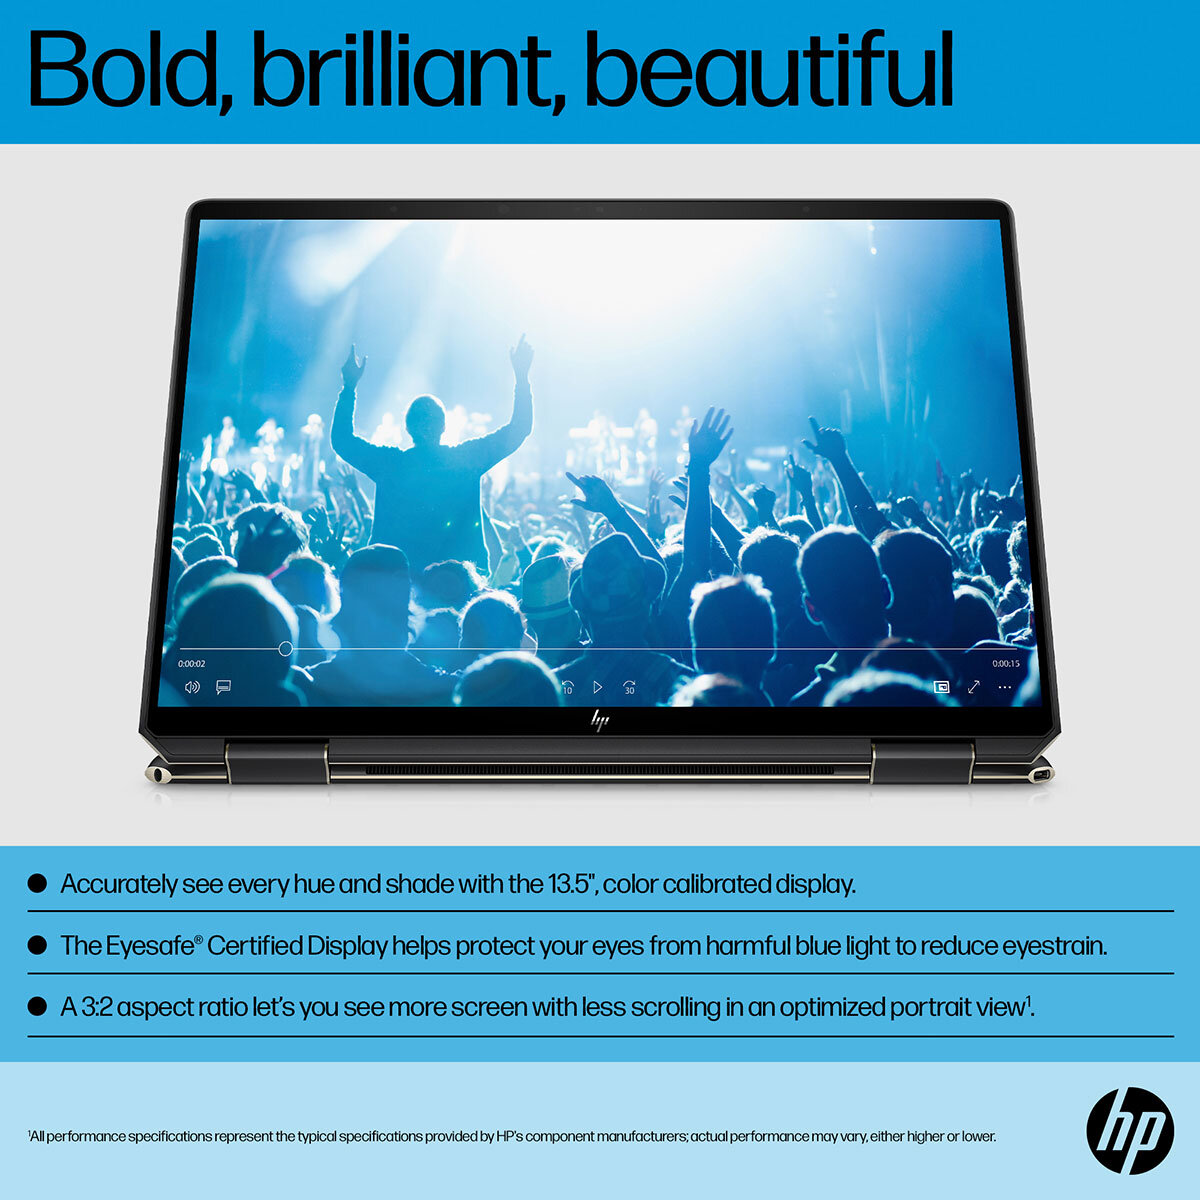 Buy HP Spectre, Intel Core i5, 8GB RAM, 512GB SSD 13.5 Inch Convertible Laptop, 14-ef2020na at costo.co.uk